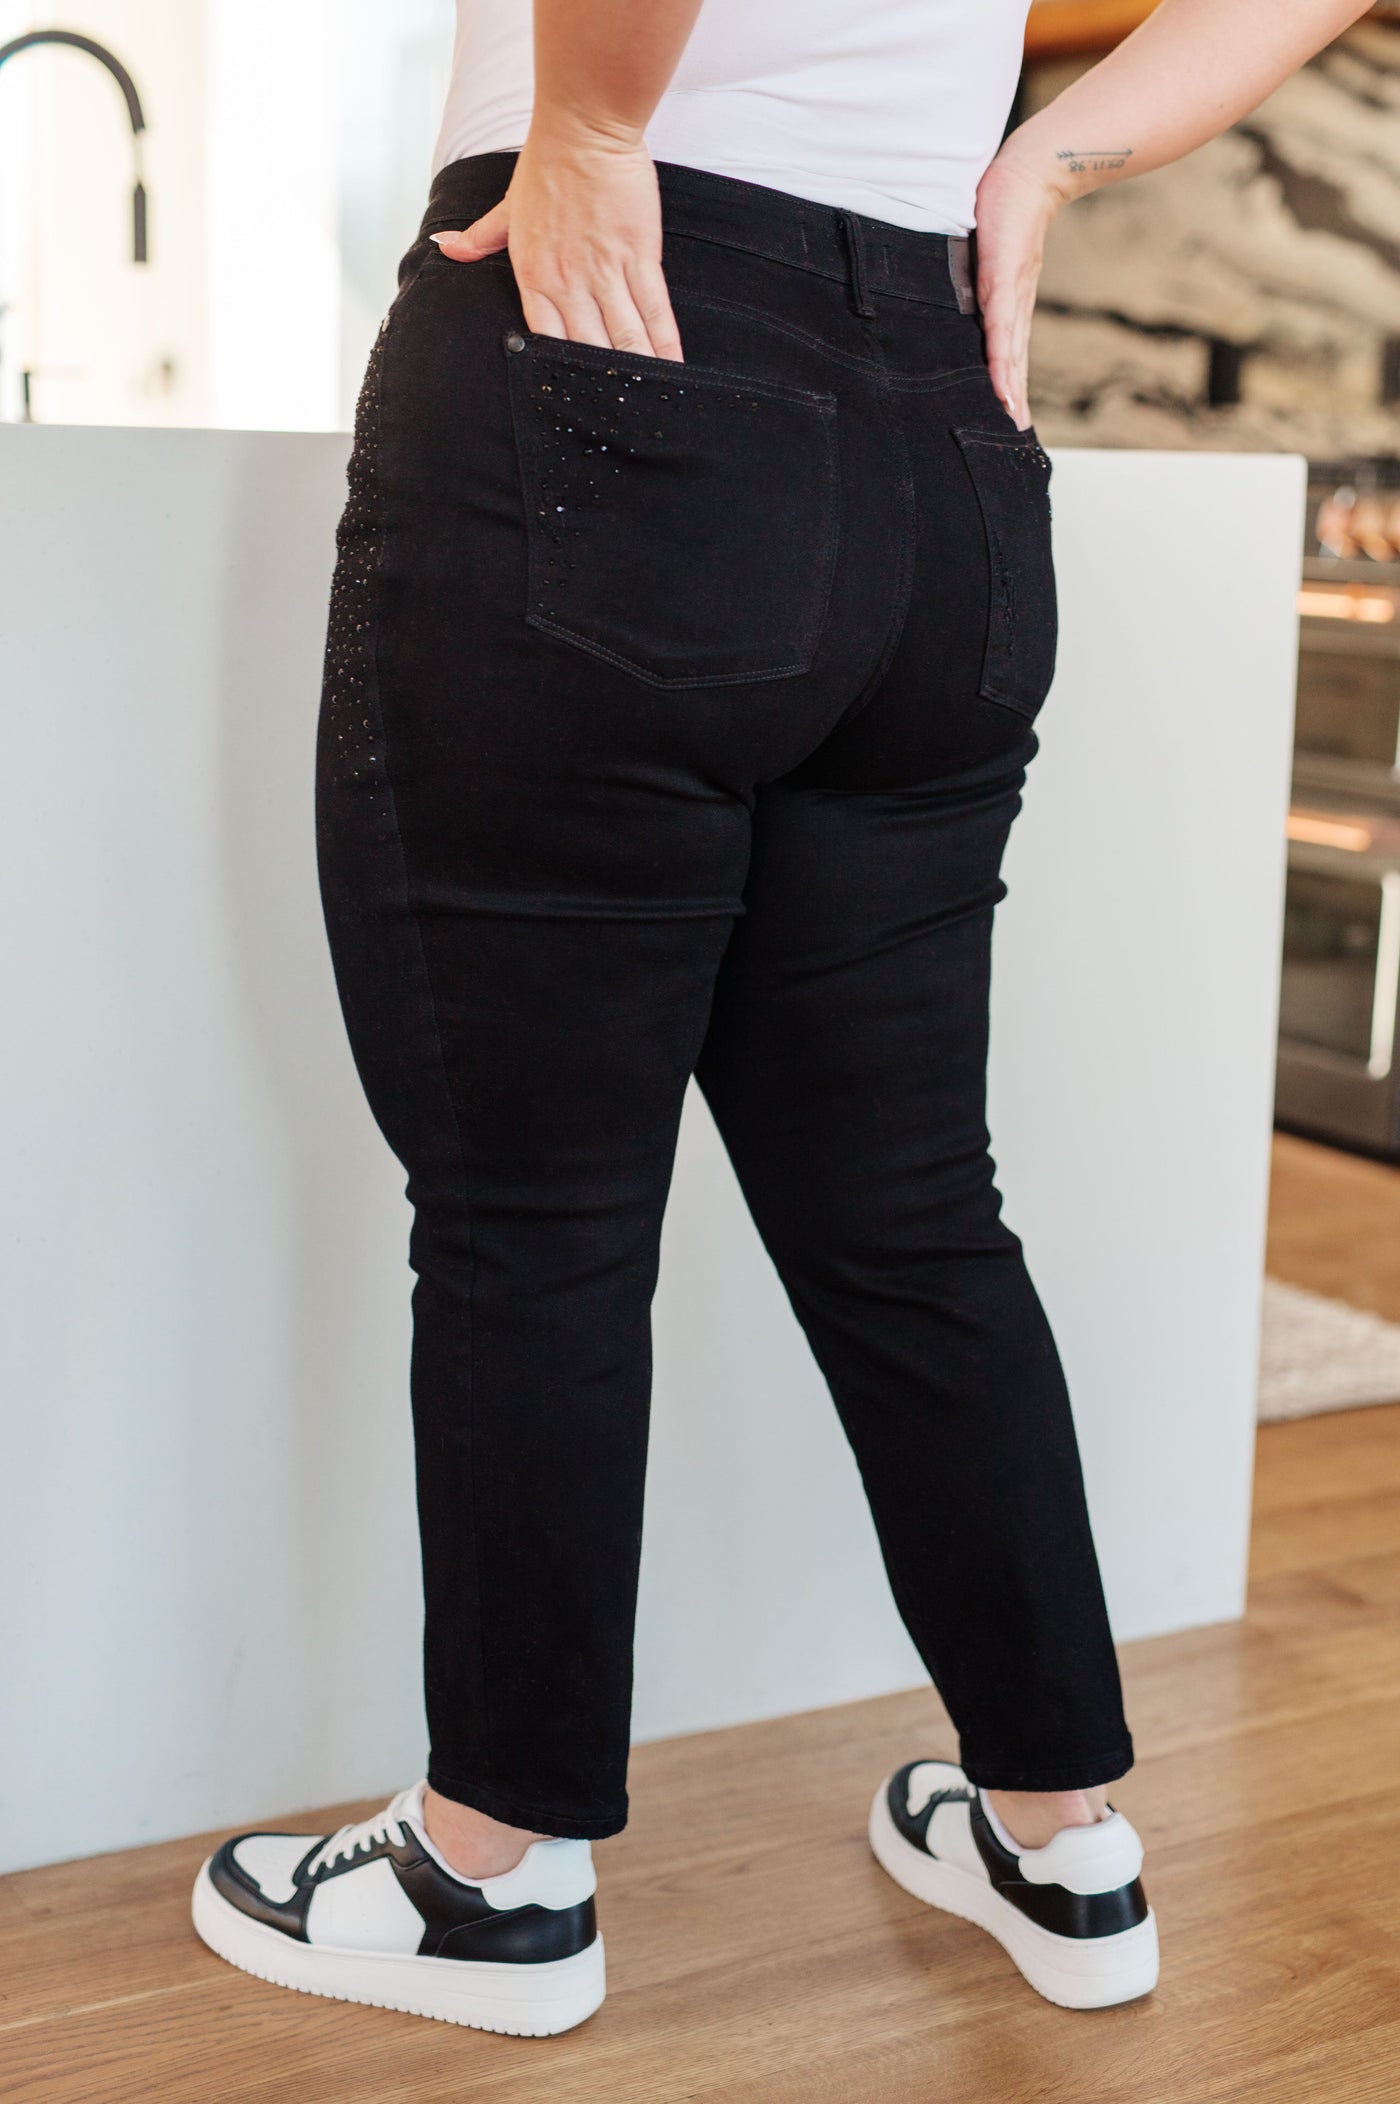 Judy Blue Reese Rhinestone Slim Fit Jeans in Black - Southern Soul Collectives